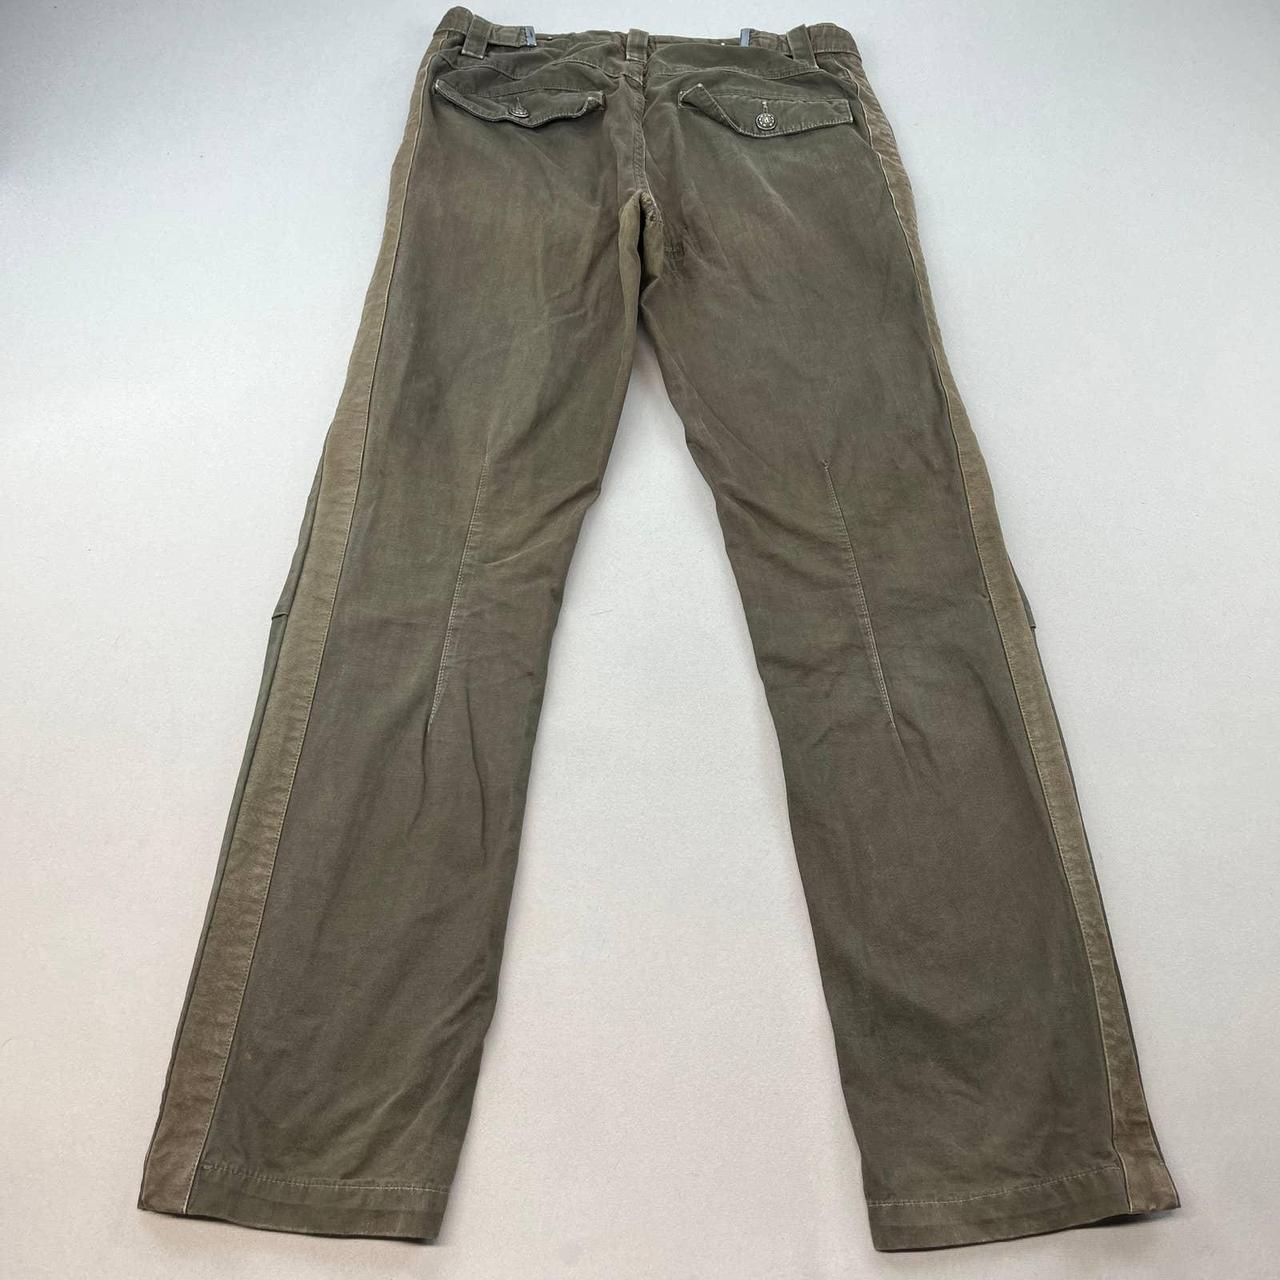 Product Image 2 - Vintage Nice Collective Pants Mens